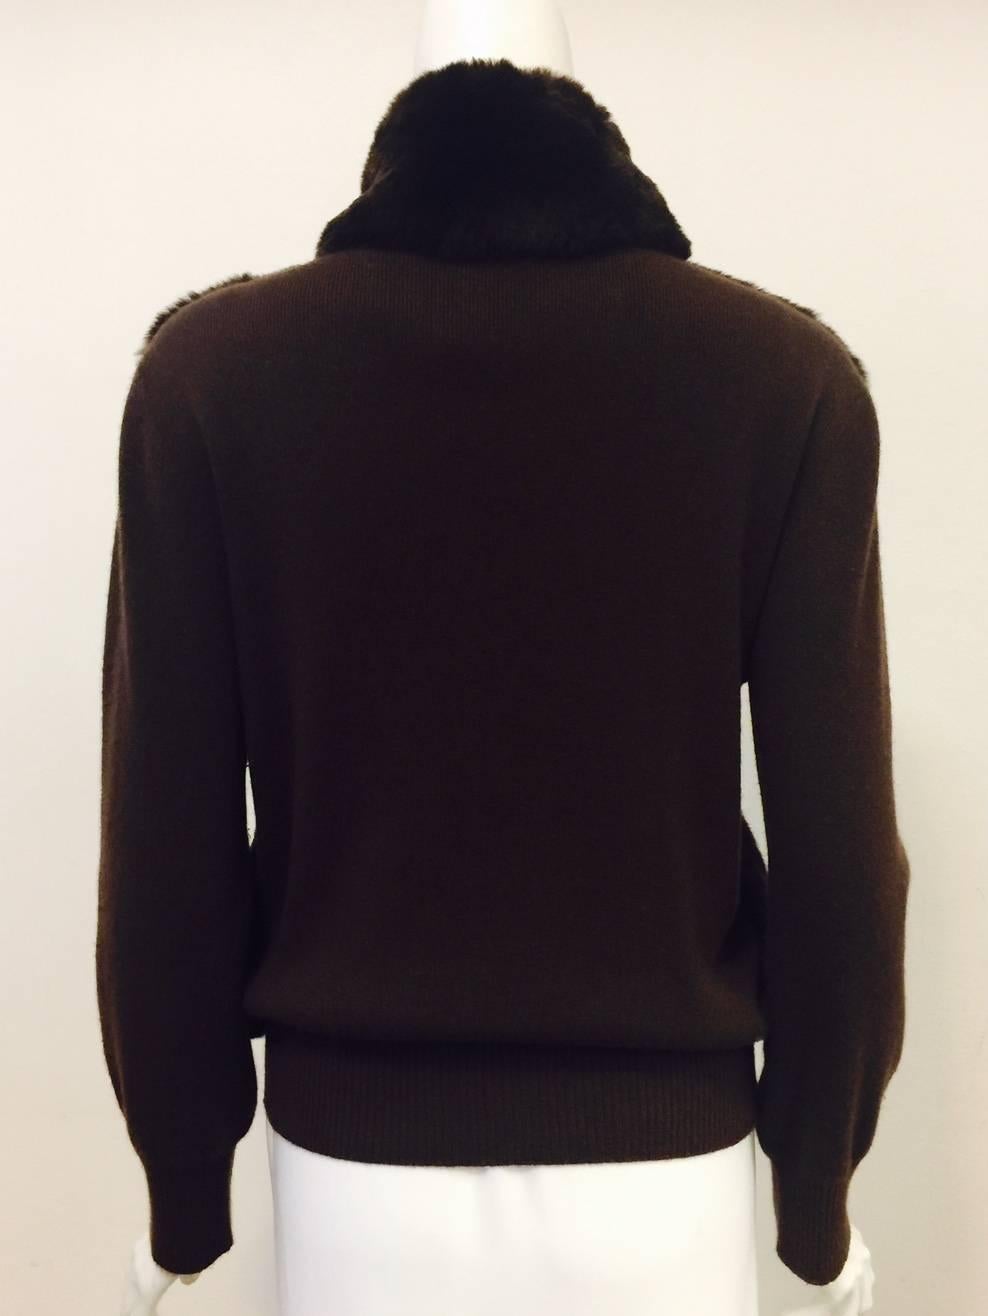 Neiman Marcus Cashmere Chocolate Cardigan/Sheared Beaver Front In Excellent Condition For Sale In Palm Beach, FL